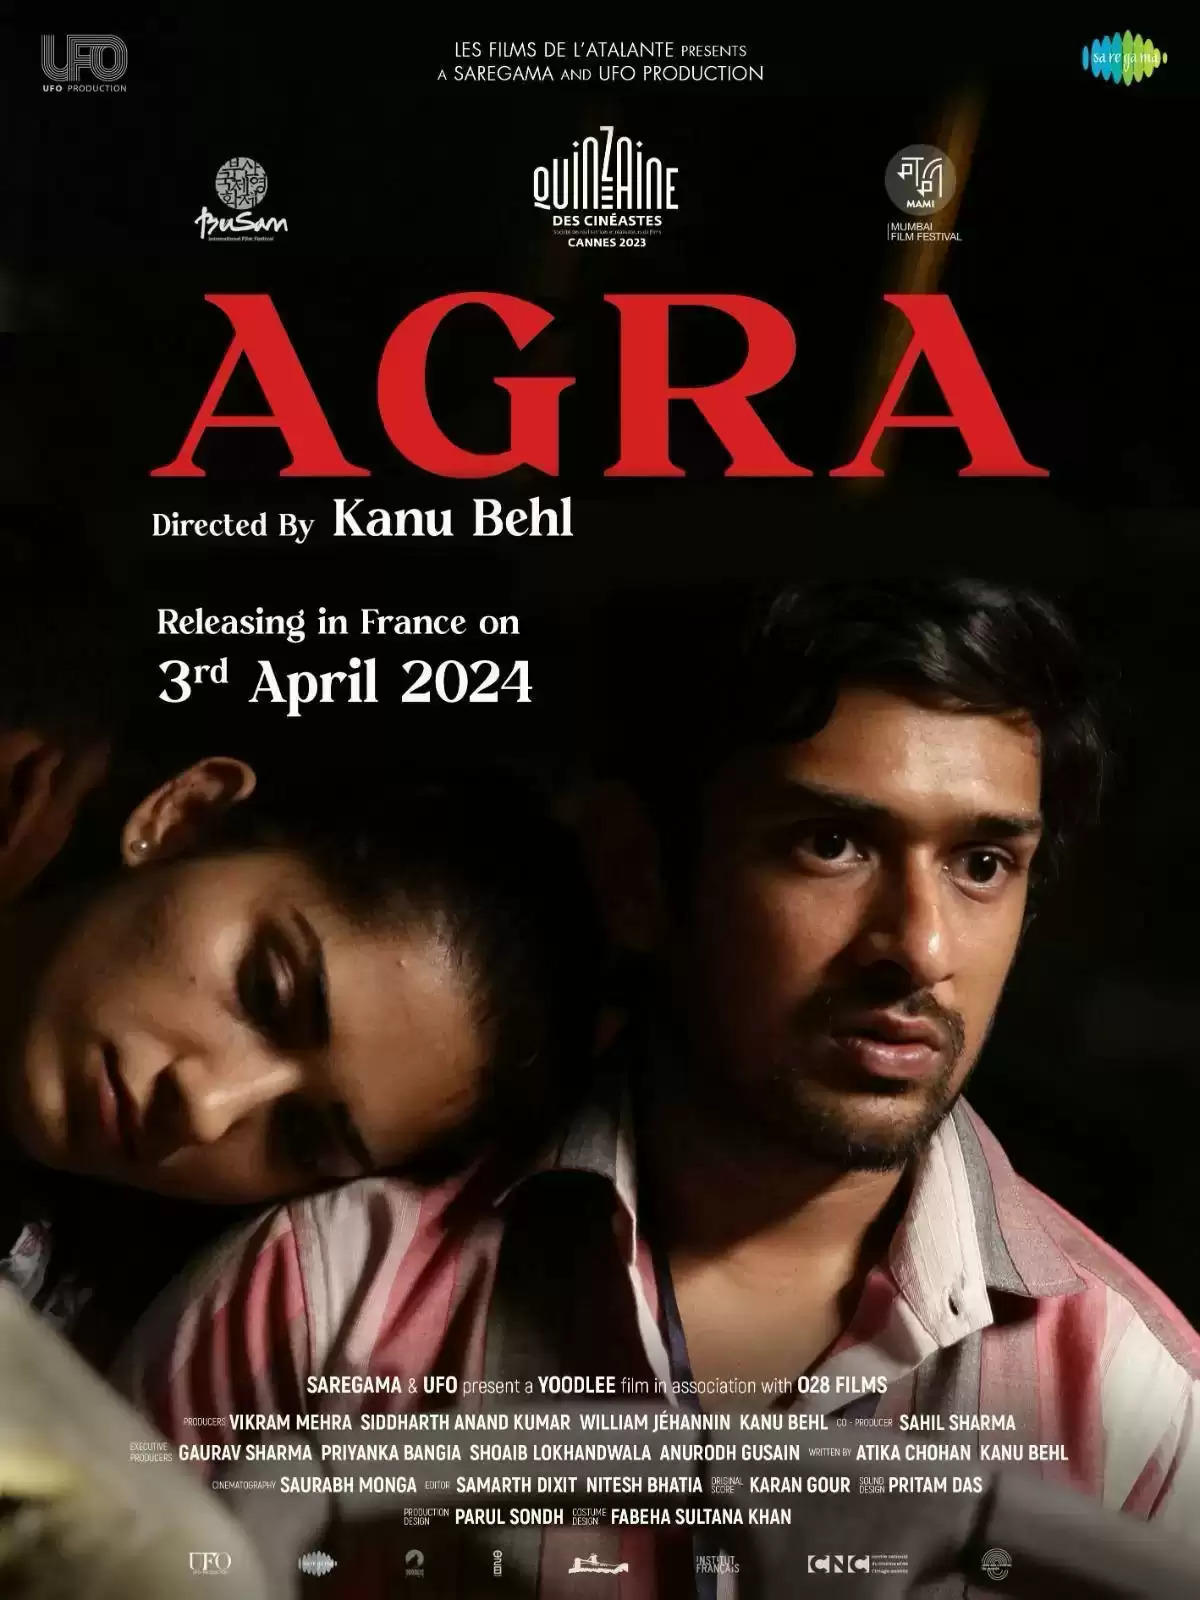 Yoodlee Films Announces the Release of Critically Acclaimed Film “Agra” in France